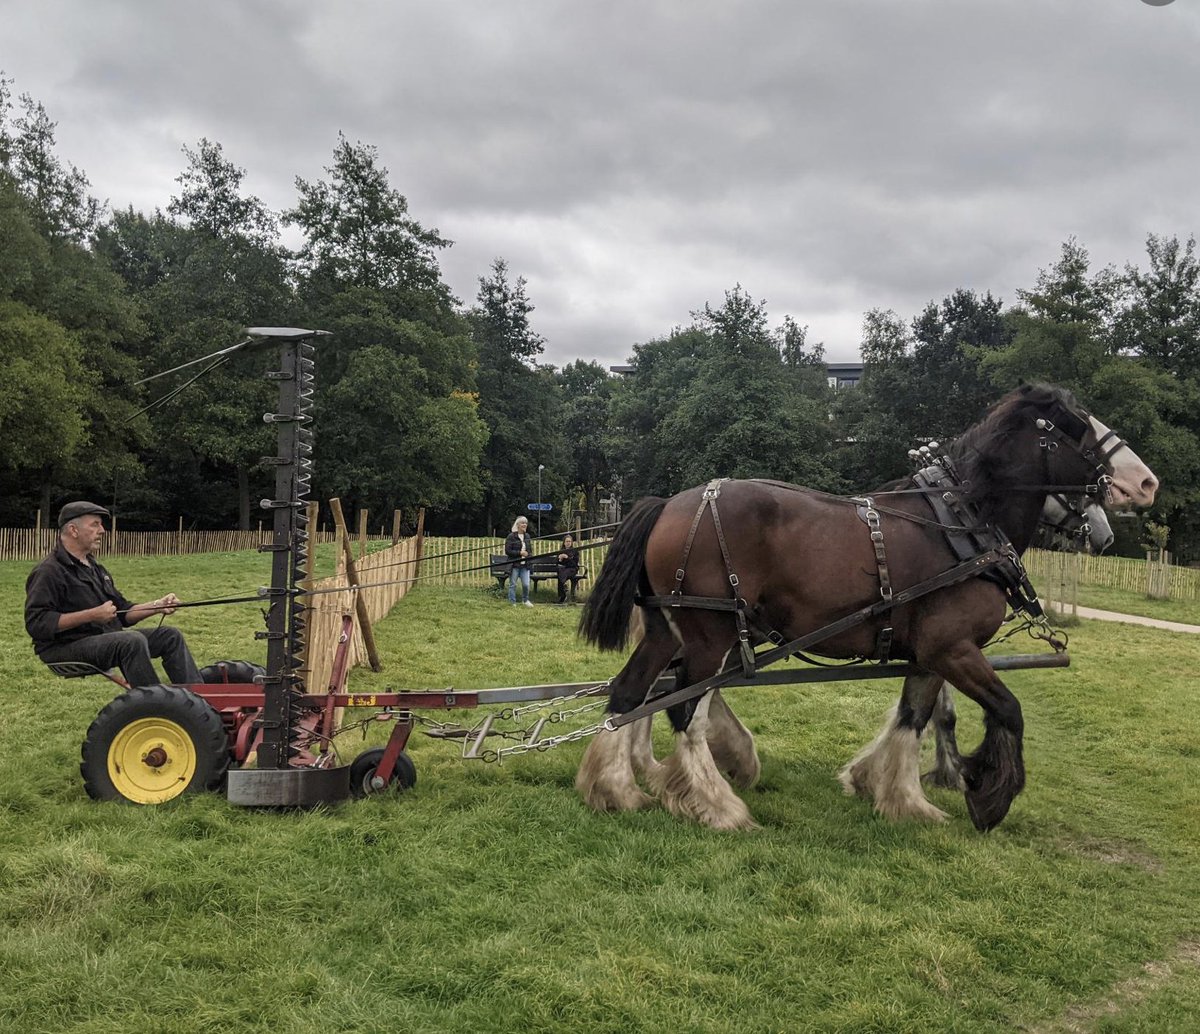 The heavy horses will be back in action at St George’s Park in #Wandsworth on the 25th March, 12pm-2.30pm! Organisers @EnableParks Wandsworth recommend arriving early to secure a good spot. Please email parks@enablelc.org with any questions. #Tooting